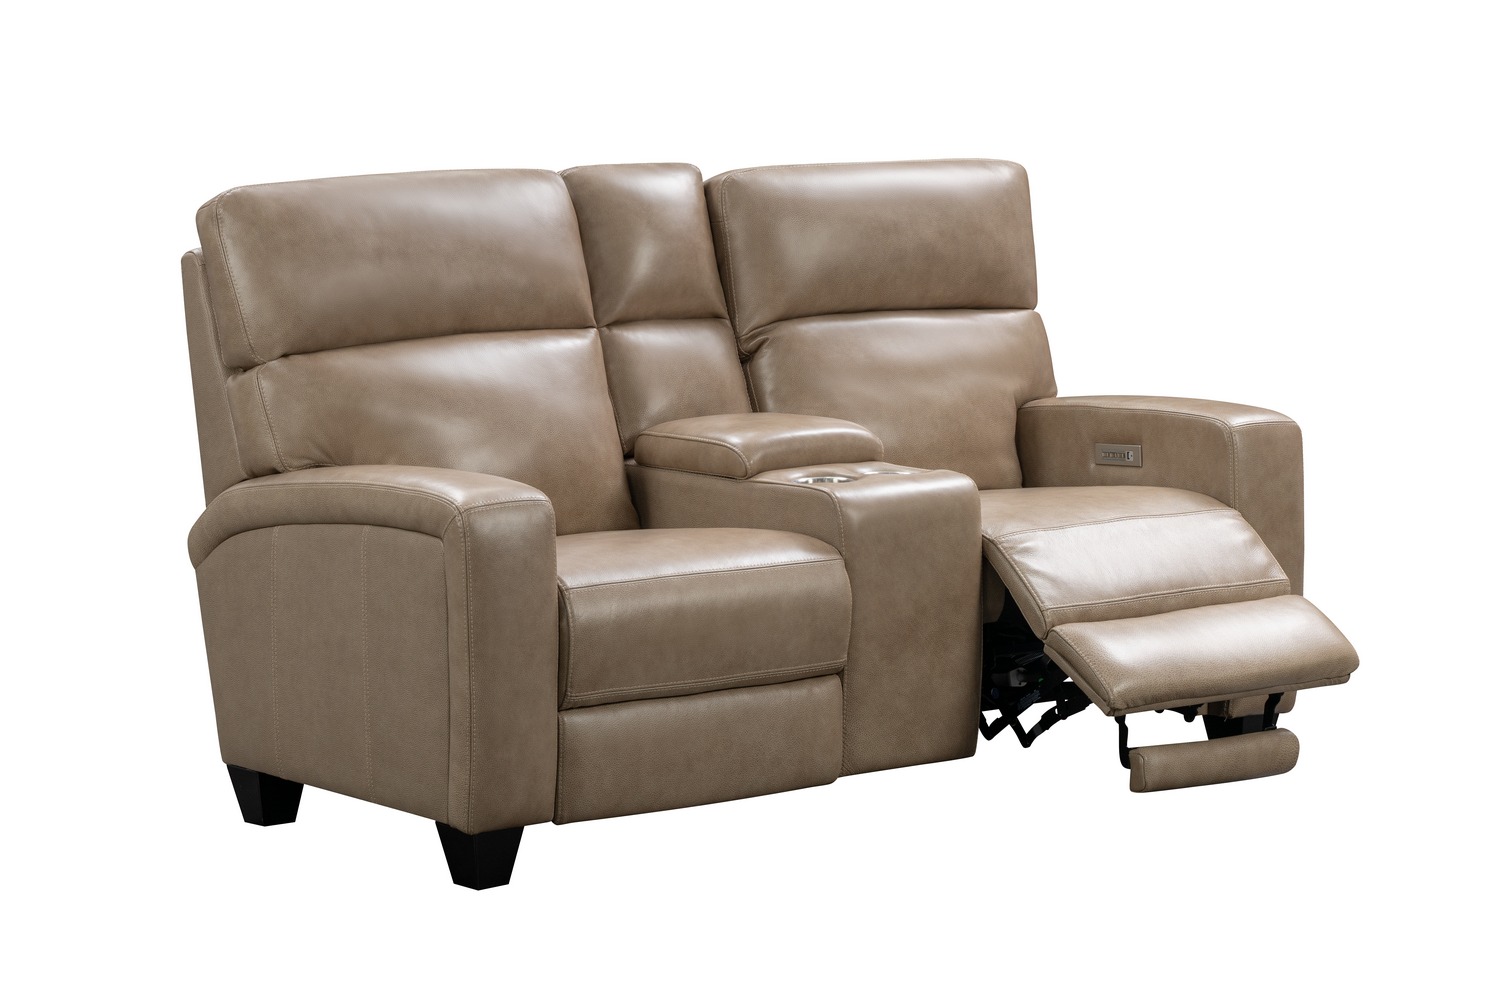 Barcalounger Macello Power Reclining Console Loveseat with Power Head Rests and Power Lumbar - Elliot Taupe/Leather Match